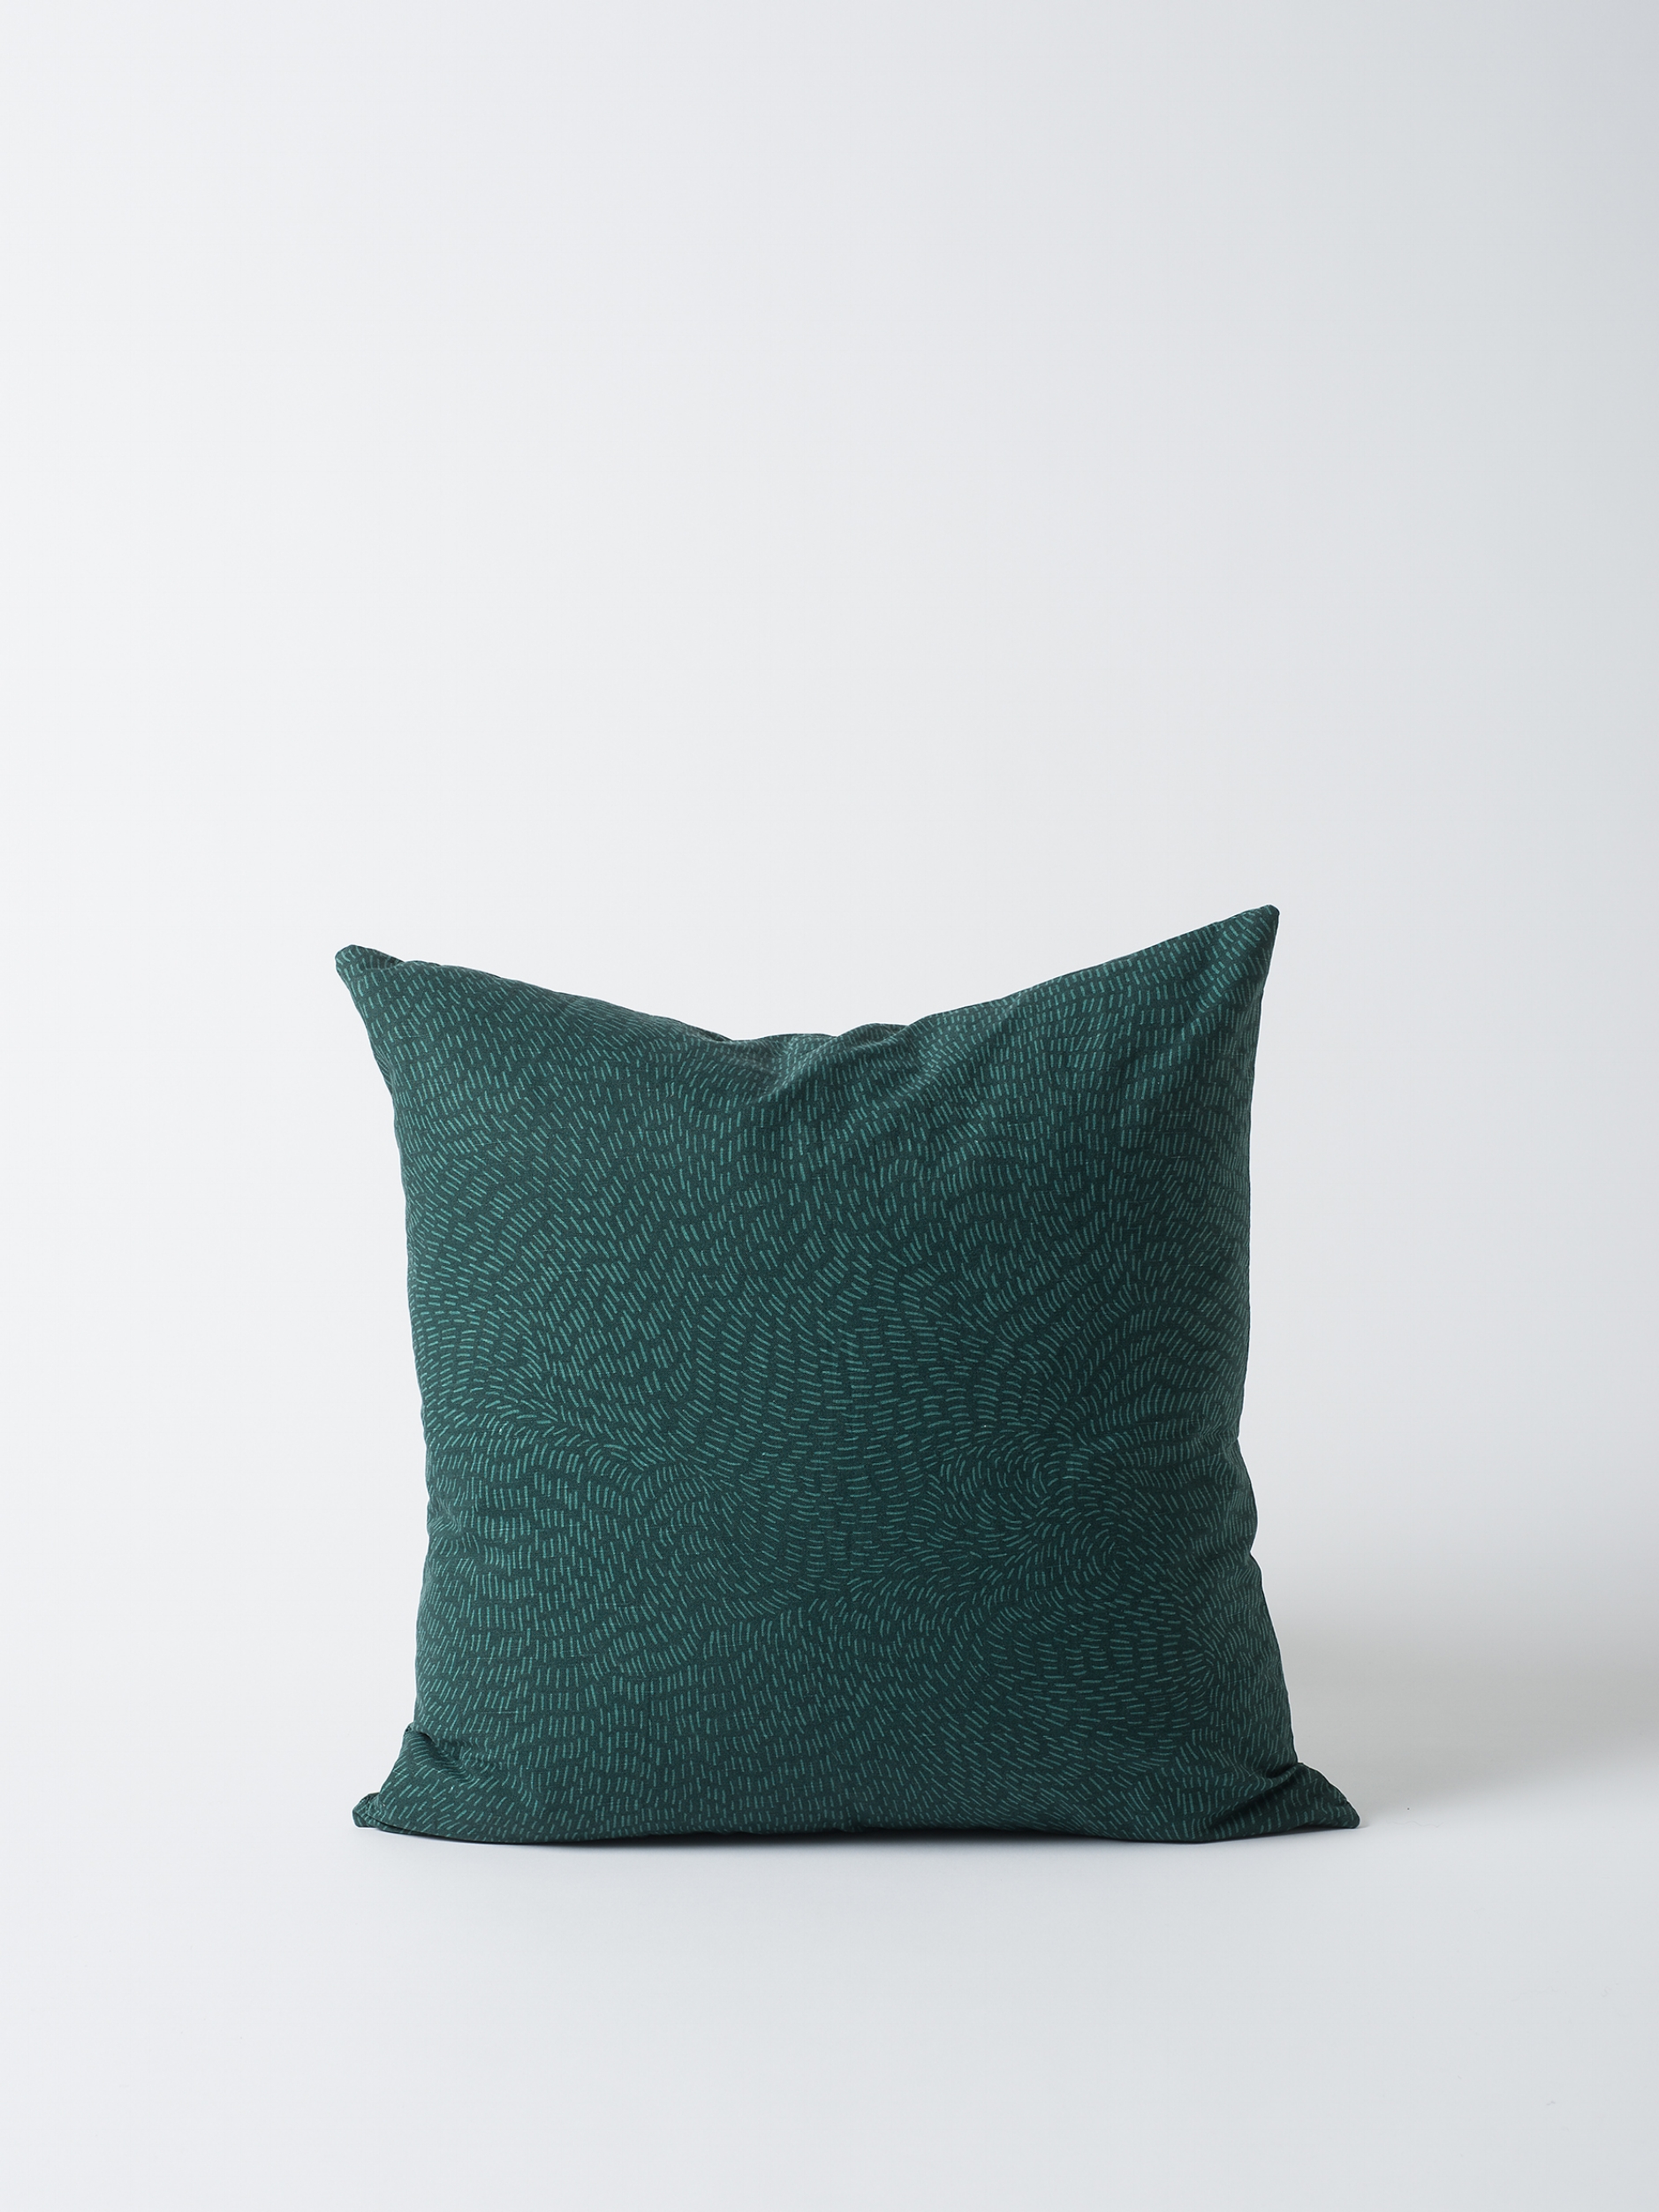 Sway Linen Cushion Cover $49.90